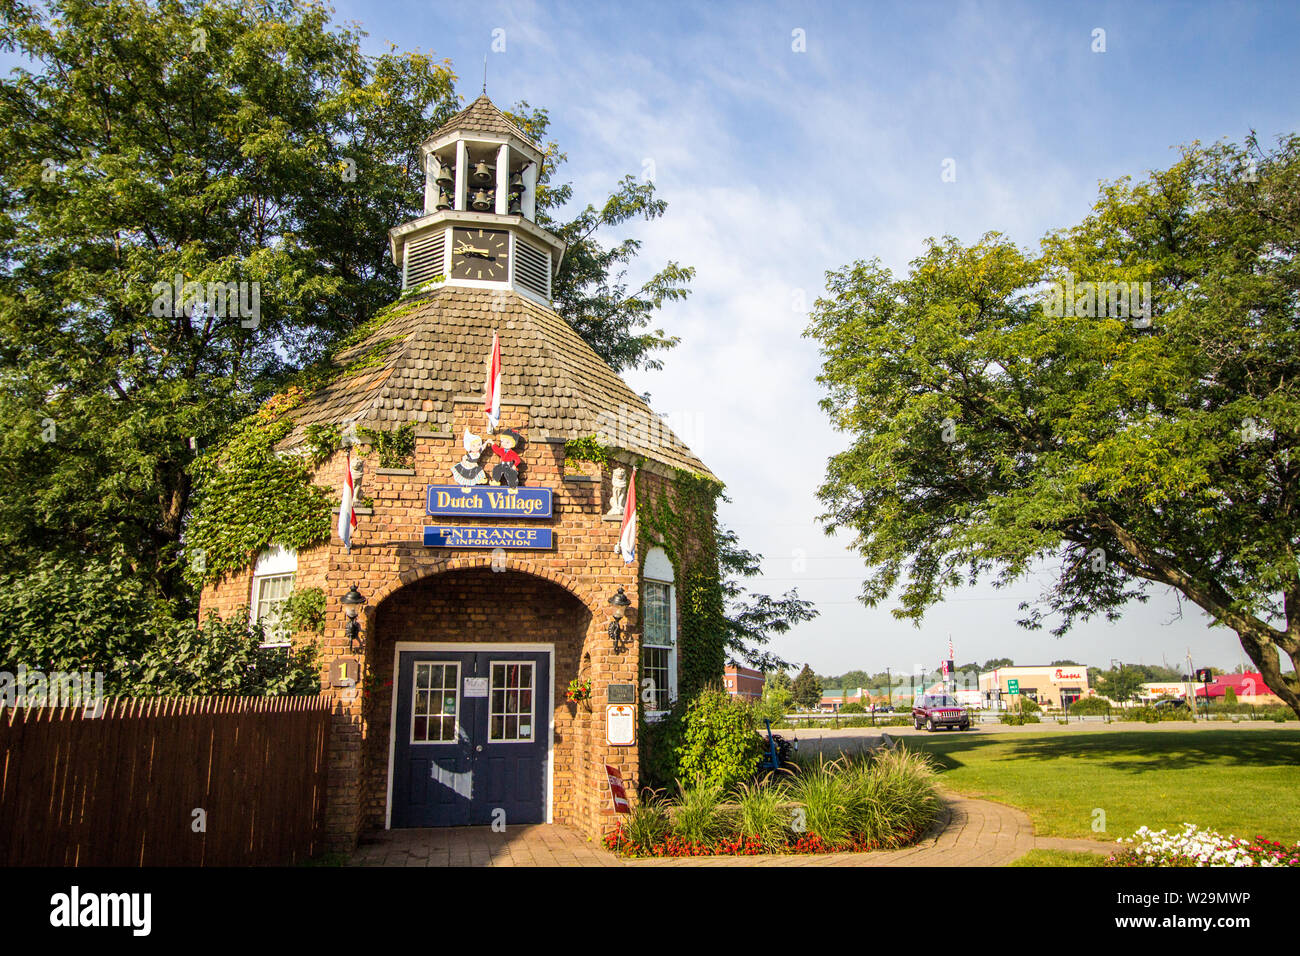 Holland, Michigan, USA - September 18, 2018: Street View of Dutch style cottage and shops at Nelis Dutch Village. Stock Photo